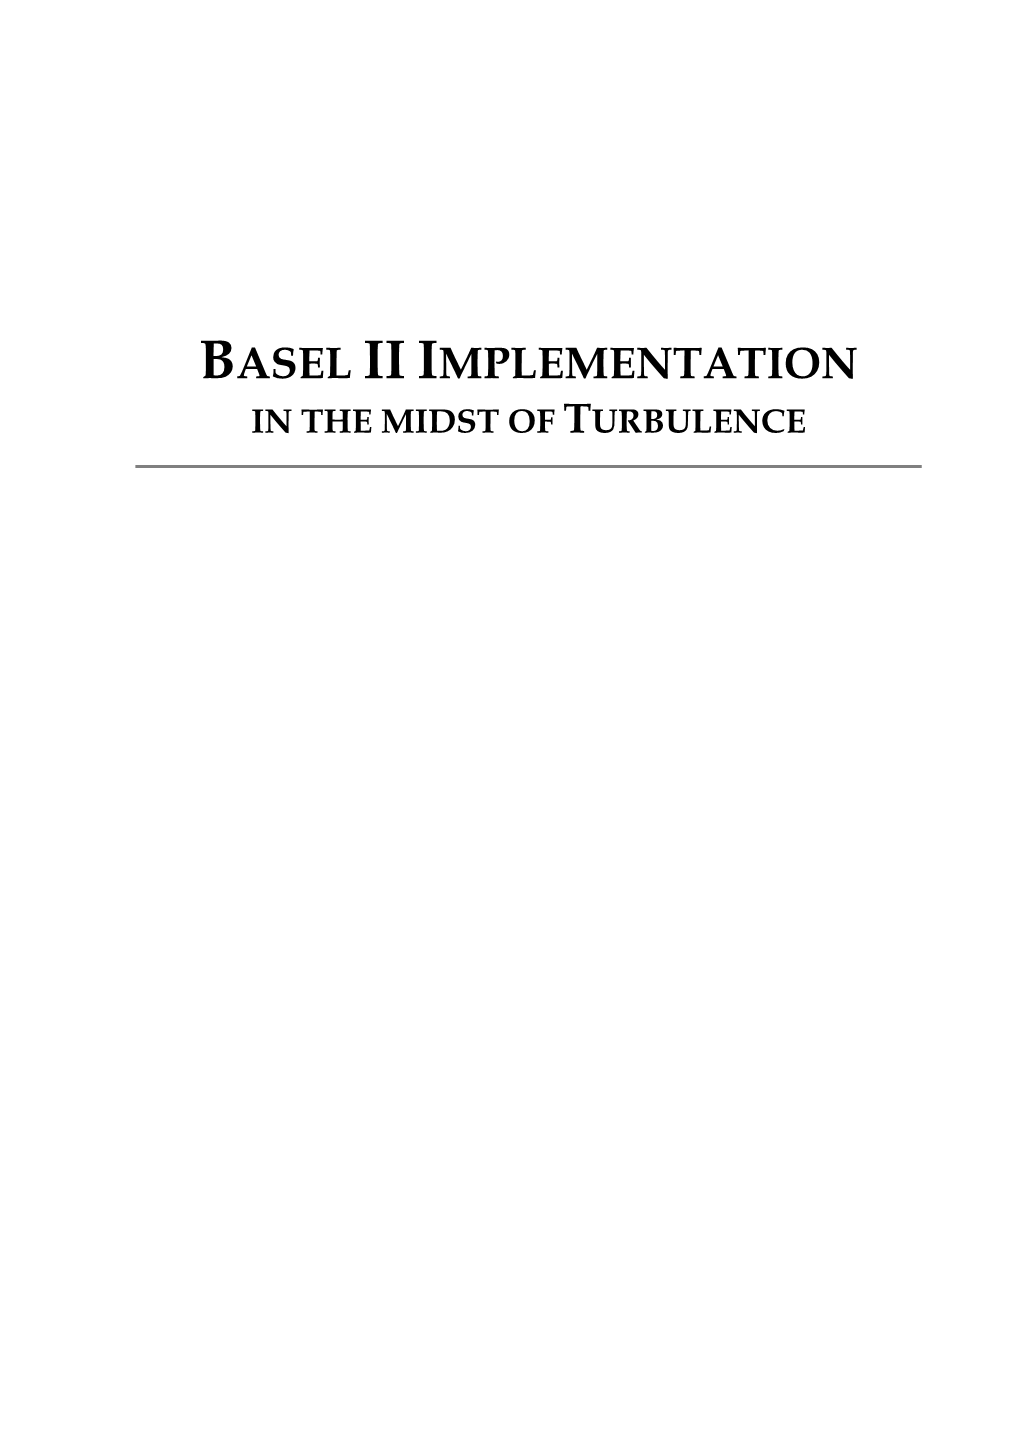 Basel Ii Implementation in the Midst of Turbulence